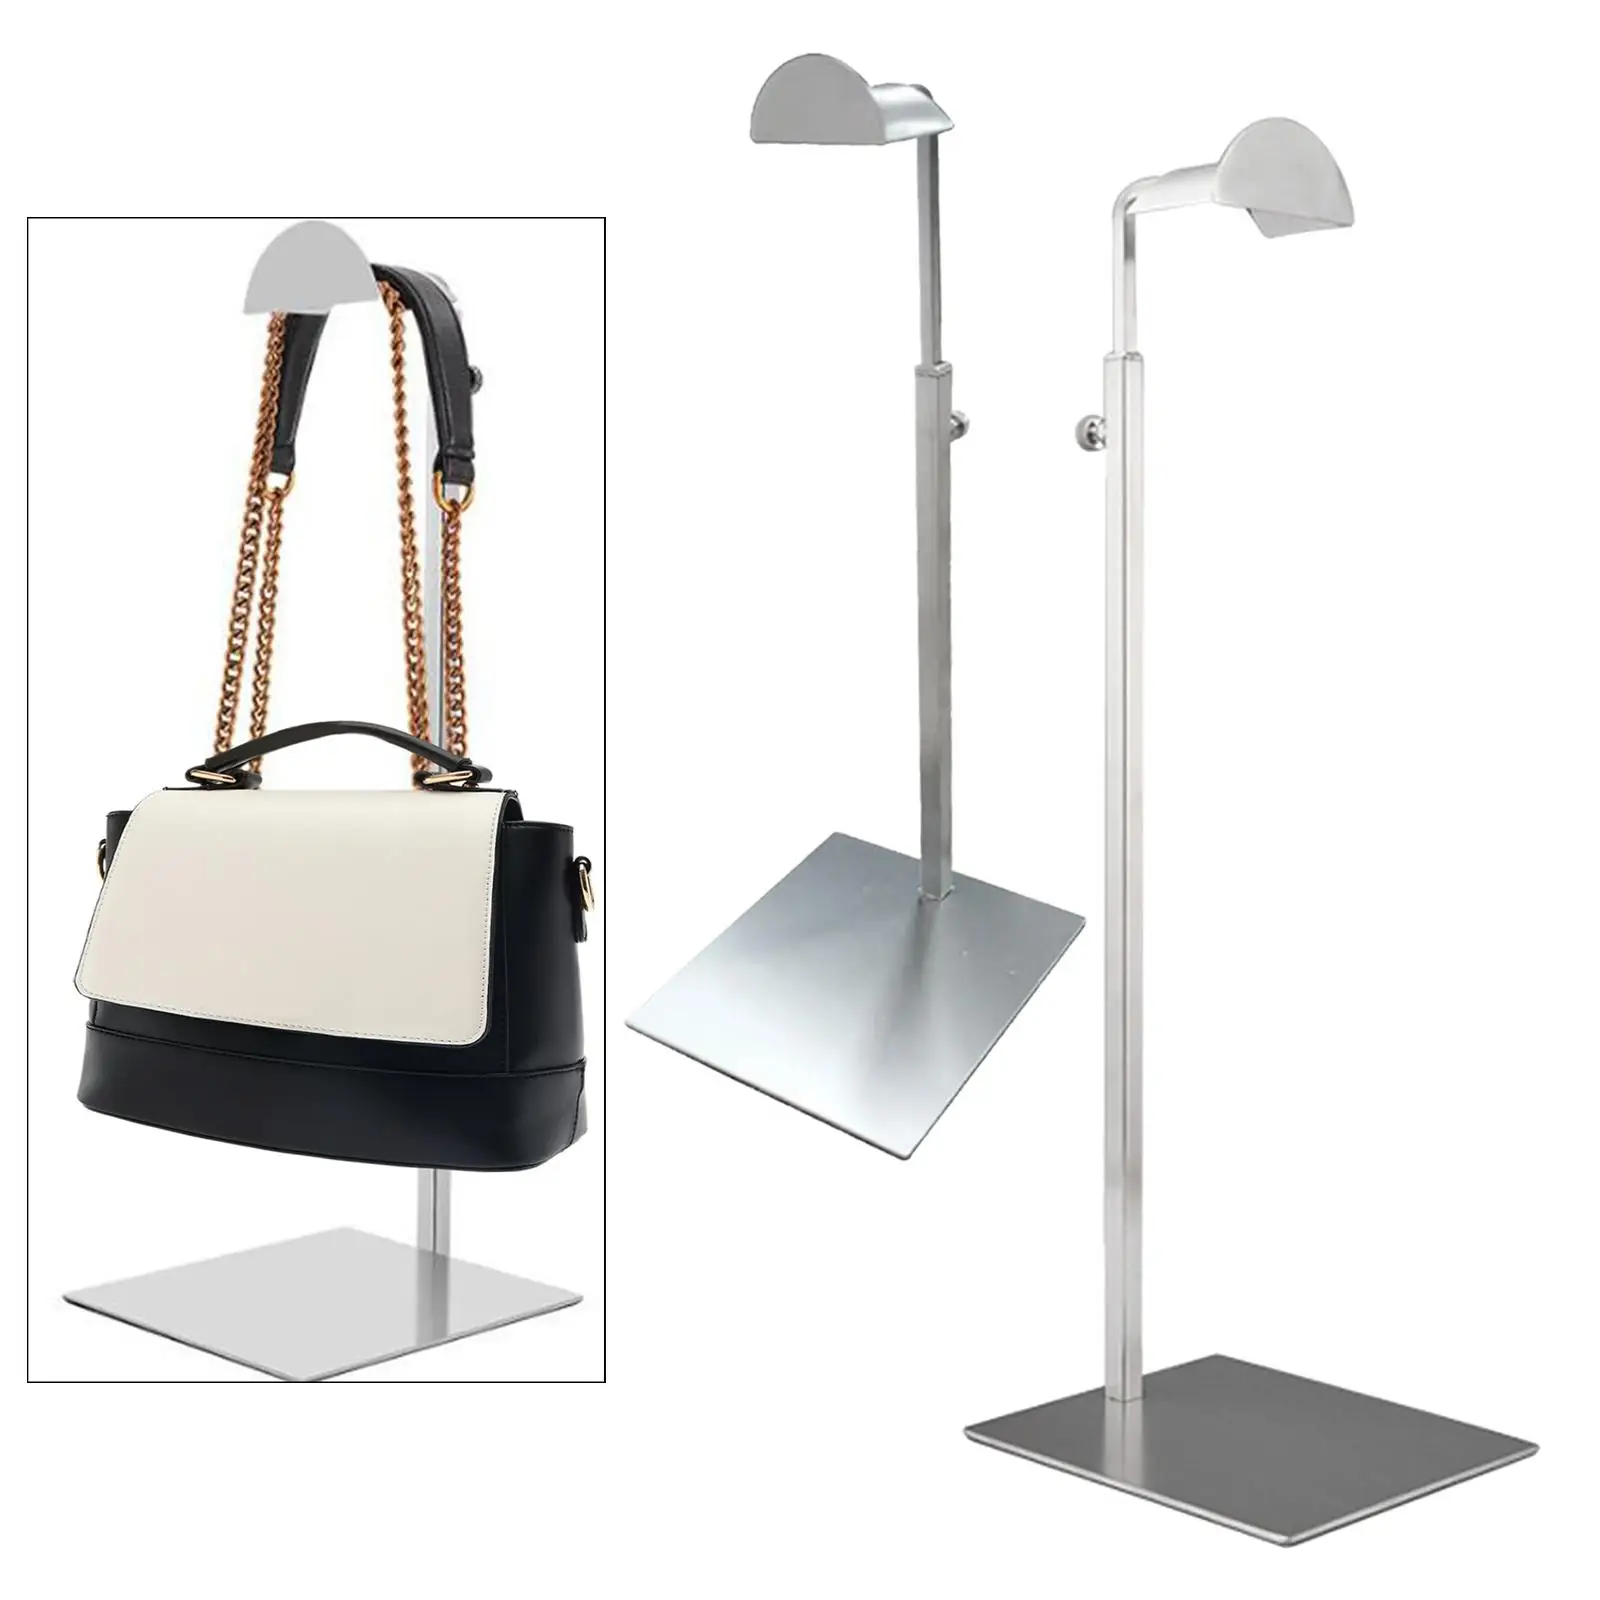 Bag Display Stand Adjustable Tabletop Multifunctional Wallet Purse Stand